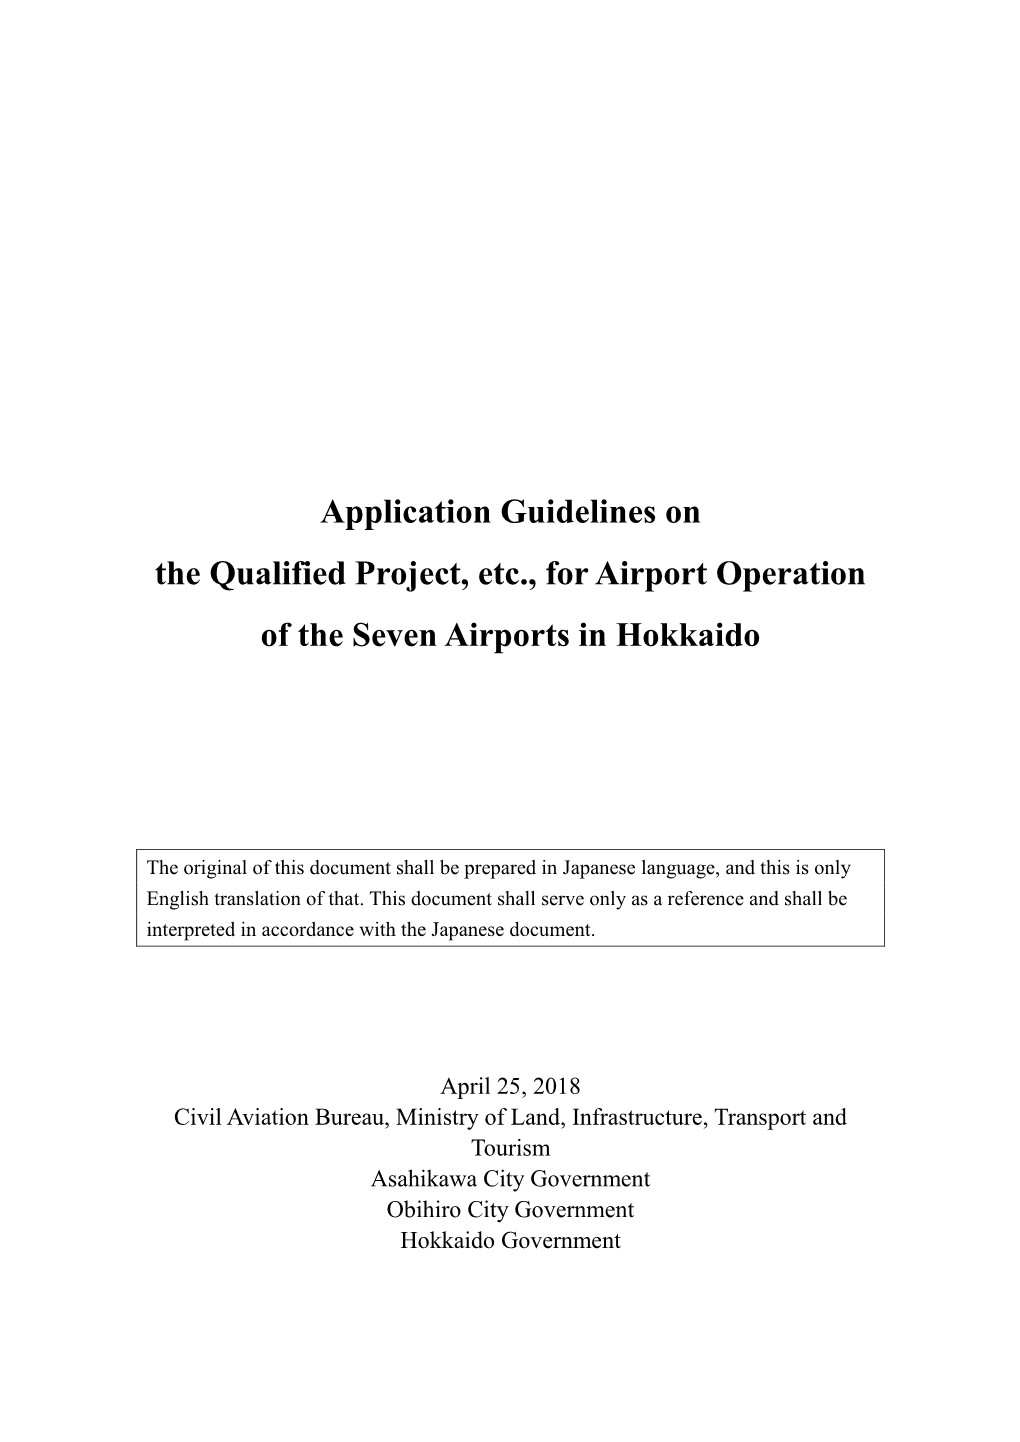 Application Guidelines on the Qualified Project, Etc., for Airport Operation of the Seven Airports in Hokkaido